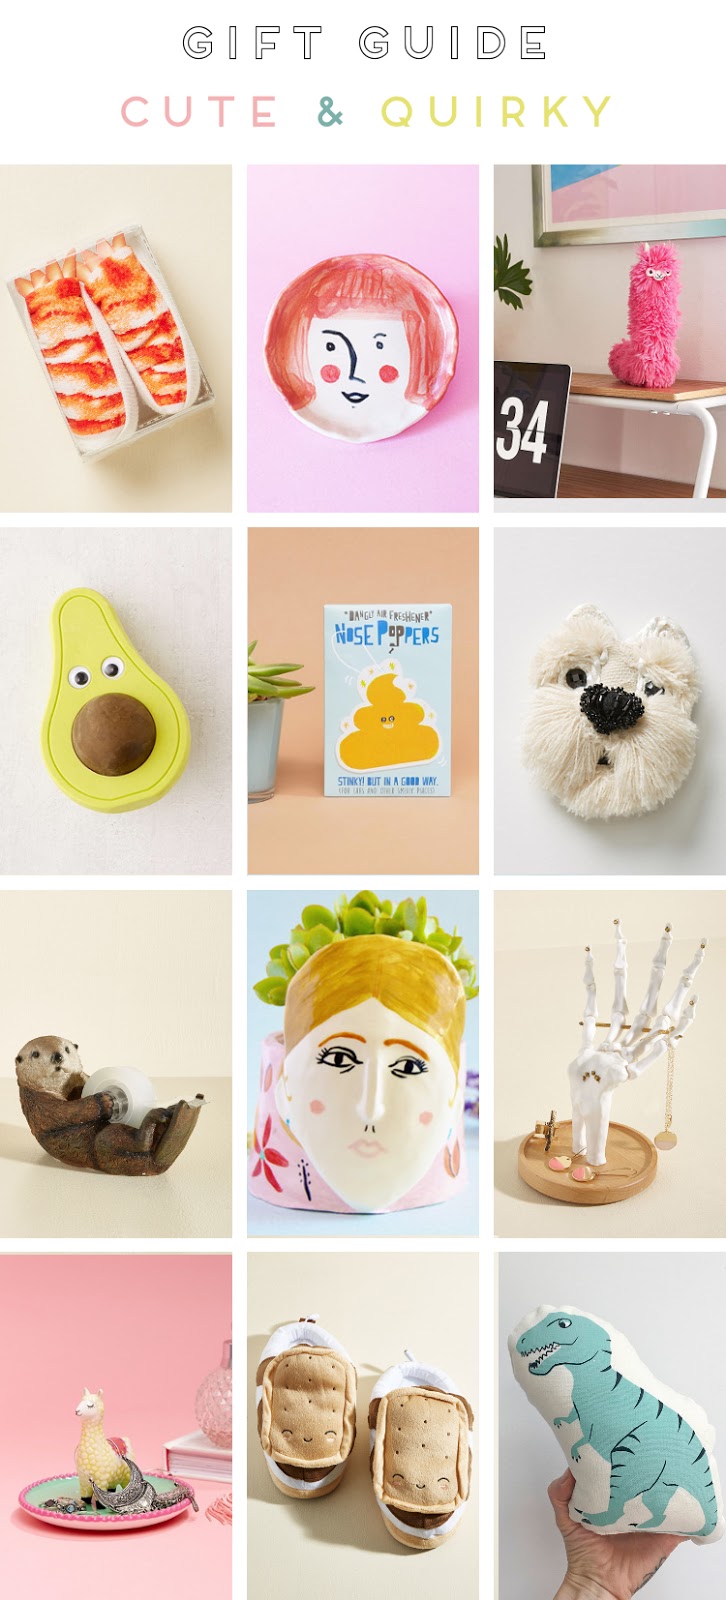 HOLIDAY GIFT GUIDE - CUTE & QUIRKY.